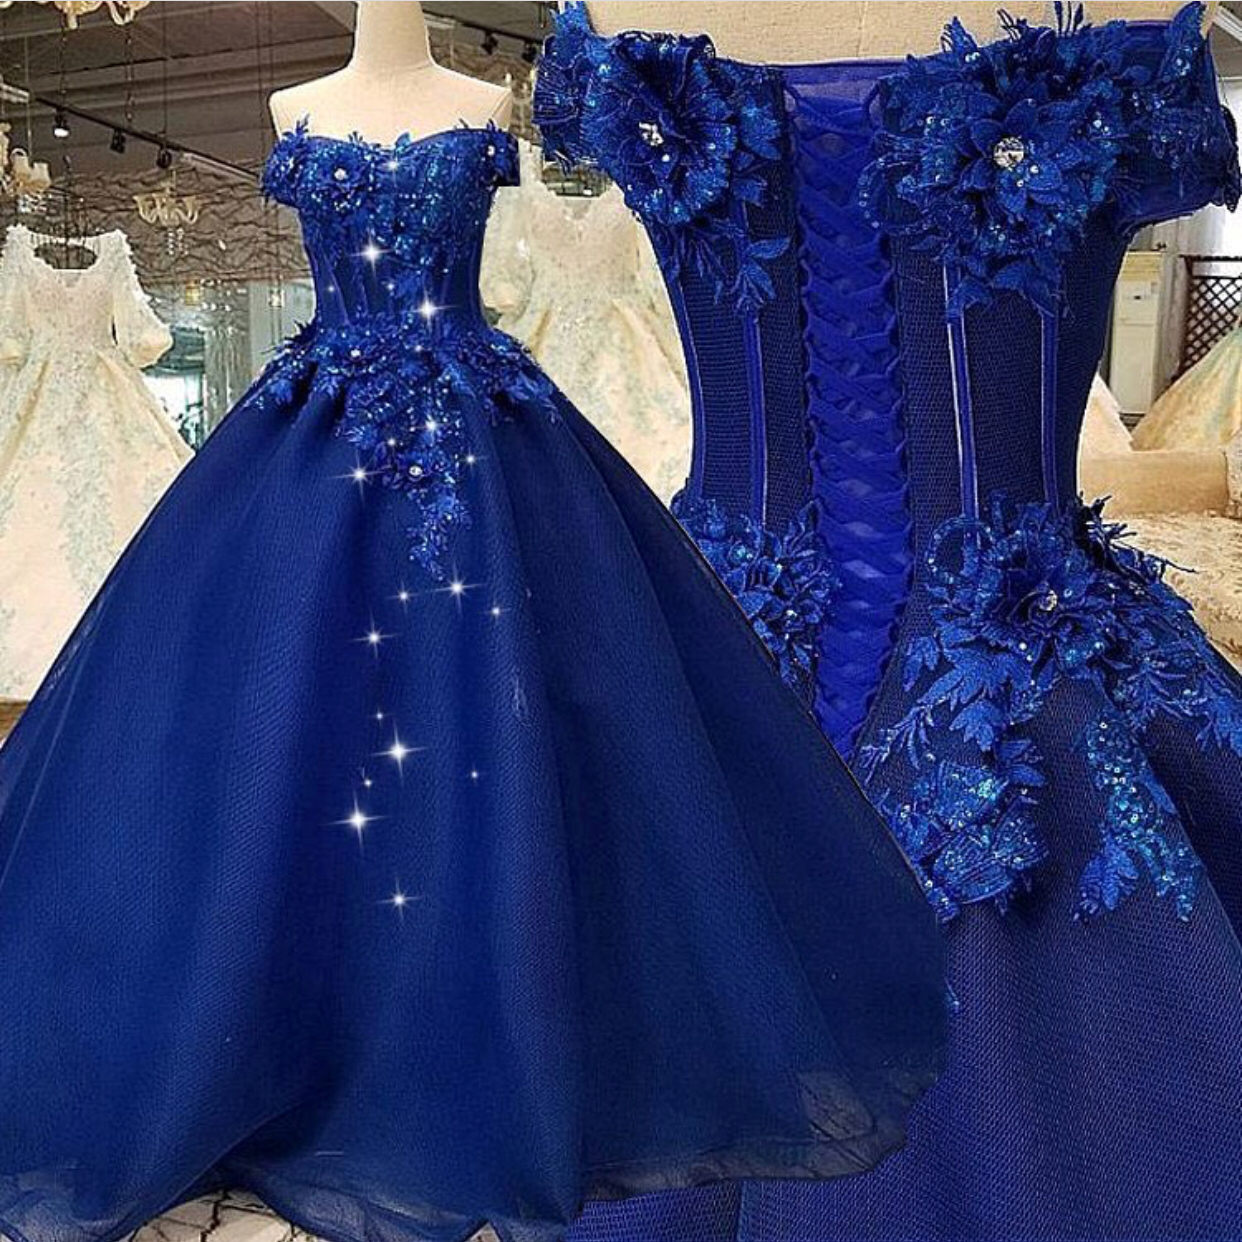 Off The Shoulder Prom Dress, Ball Gown Prom Dress, Royal Blue Prom Dress, Prom Dresses 2022, Lace Applique Prom Dress, Elegant Prom Dress, Prom